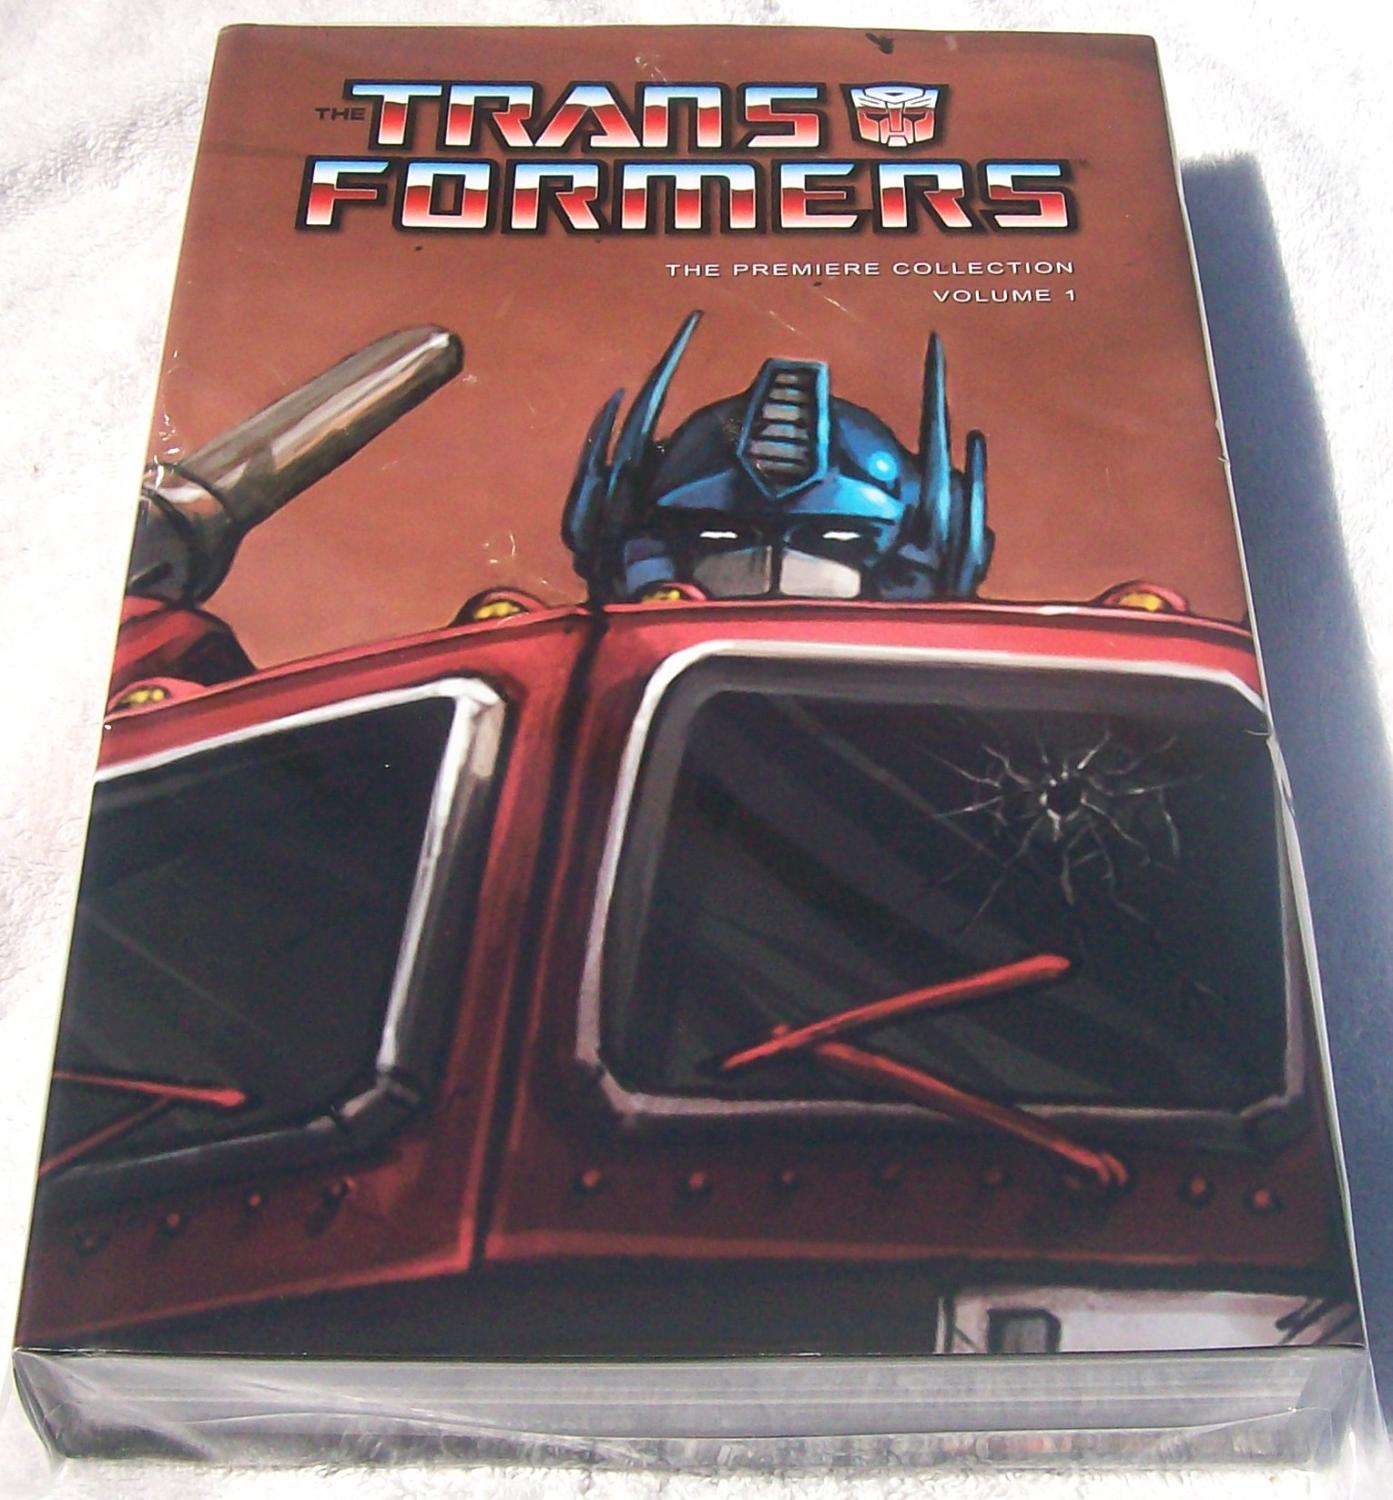 Transformers Premiere Collection Vol 1 Special Edition Hardcover w/ Dust Jacket and Signed Tip-in Plate Rare HC DJ HB IDW Publishing 2007 - Simon Furman